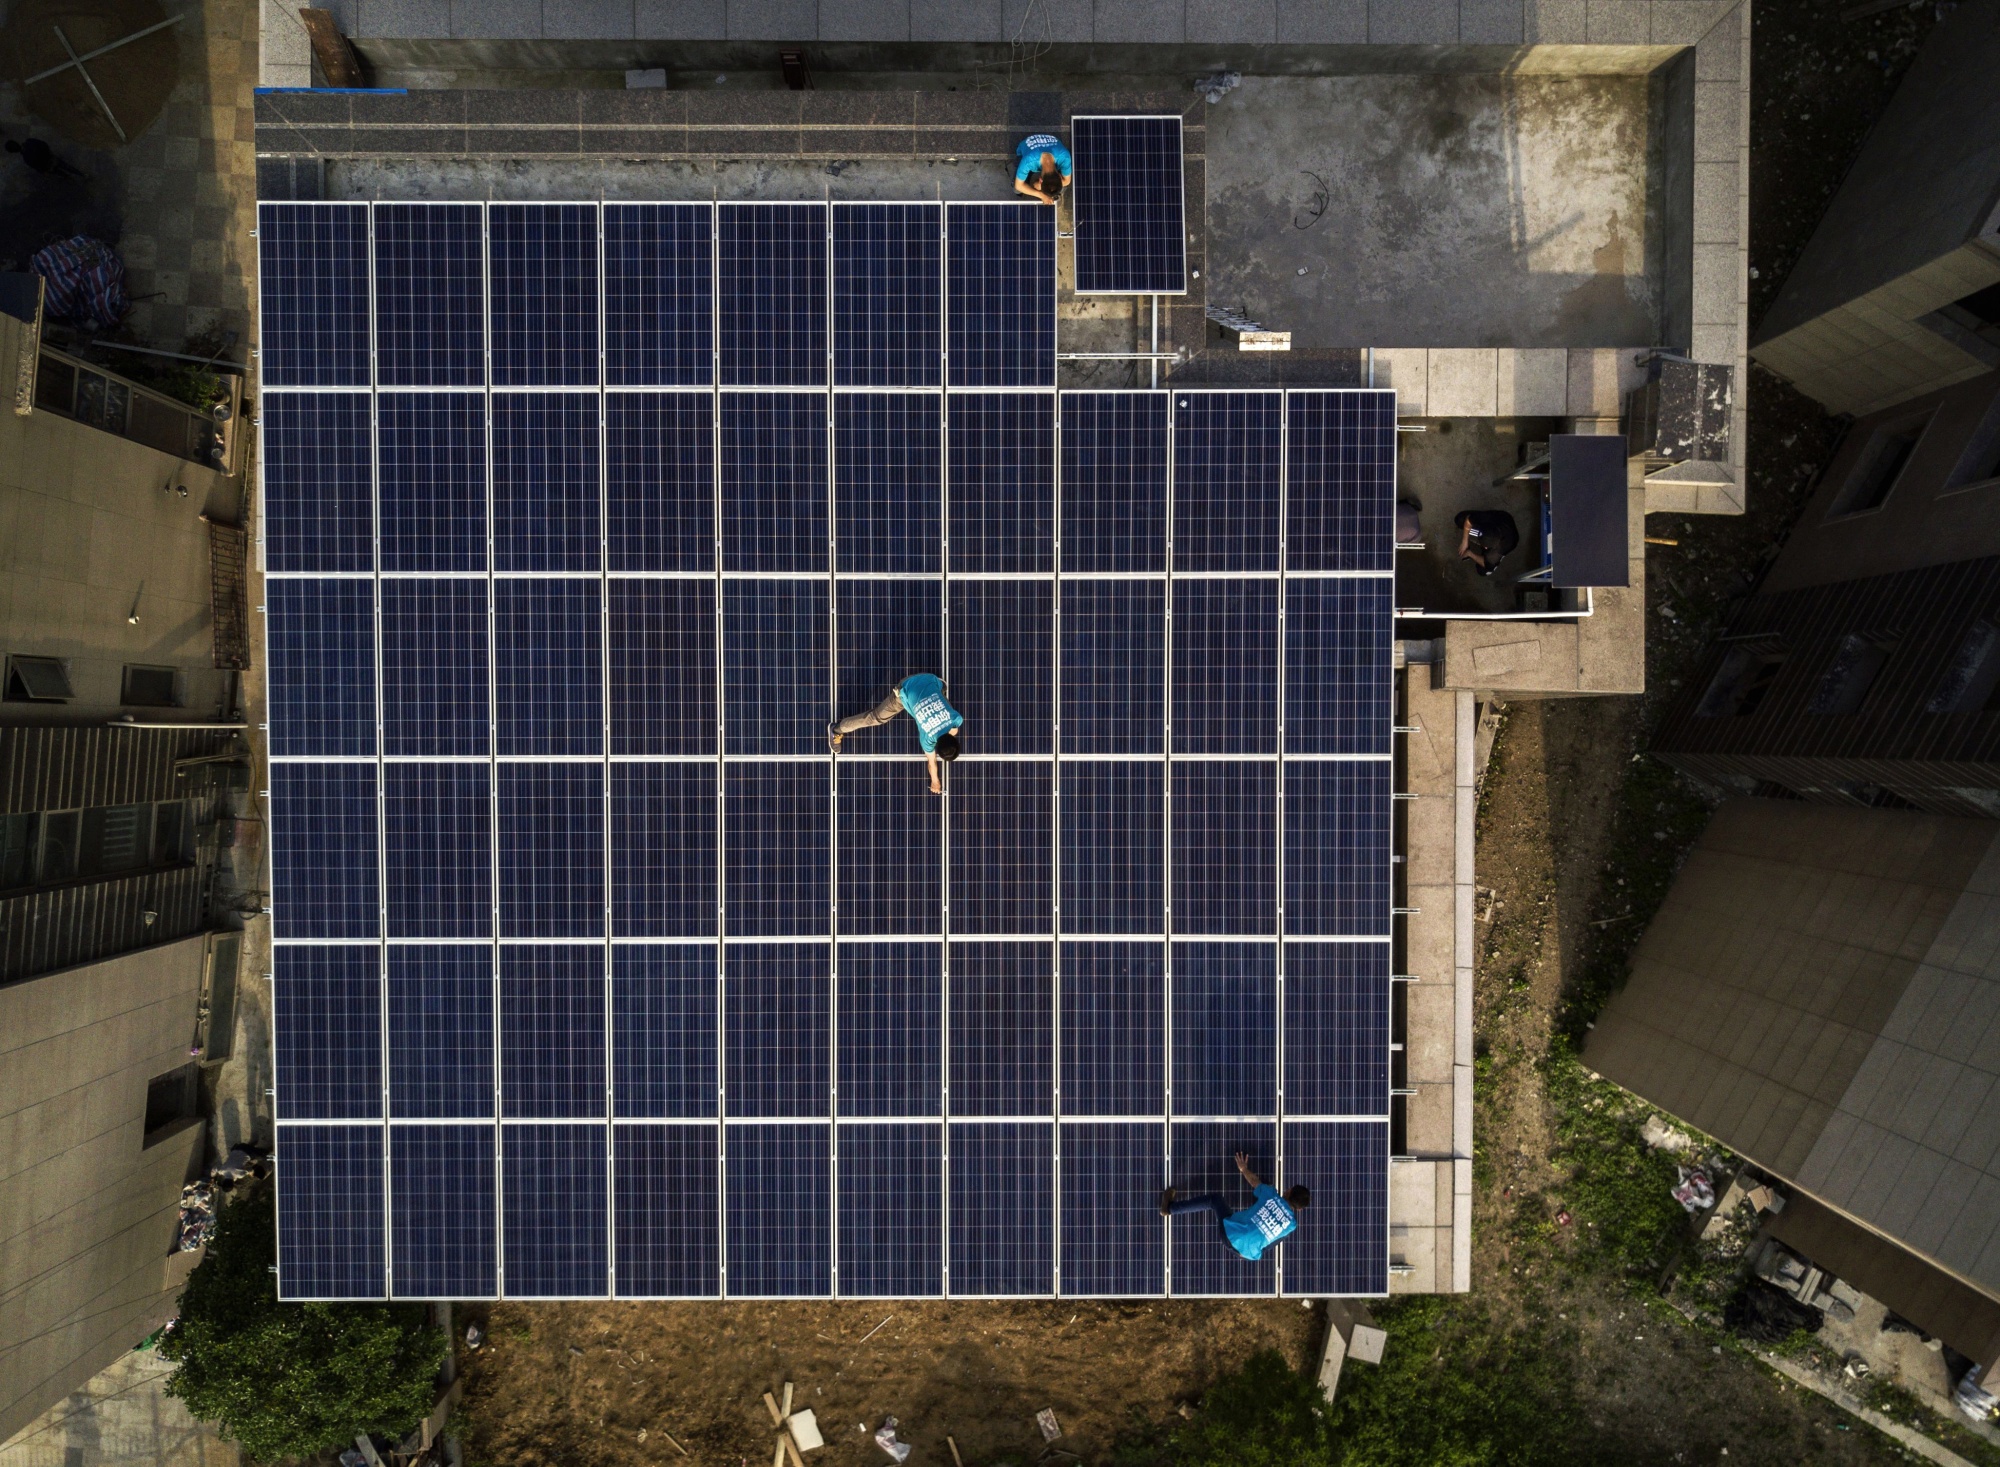 Workers from Wuhan Guangsheng Photovoltaic Company install solar panels on the roof of a building in Wuhan, China.  